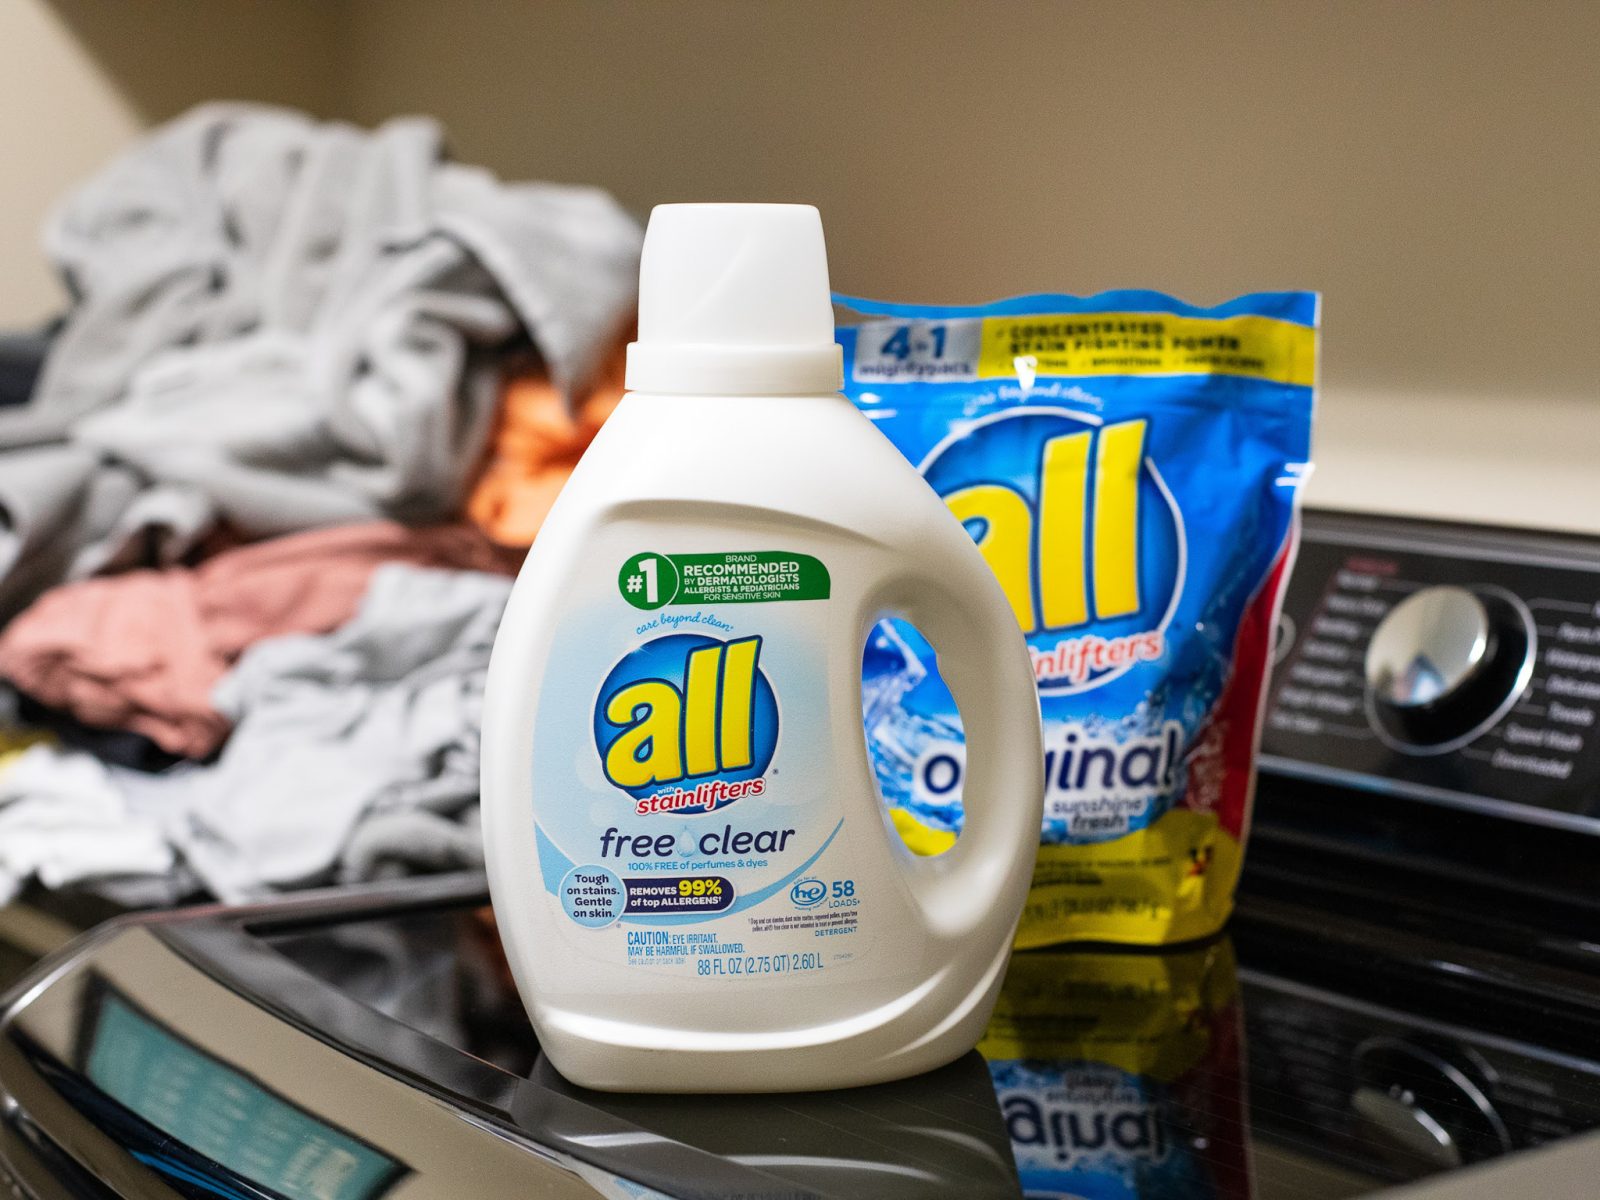 All Laundry Detergent As Low As $3.49 At Kroger